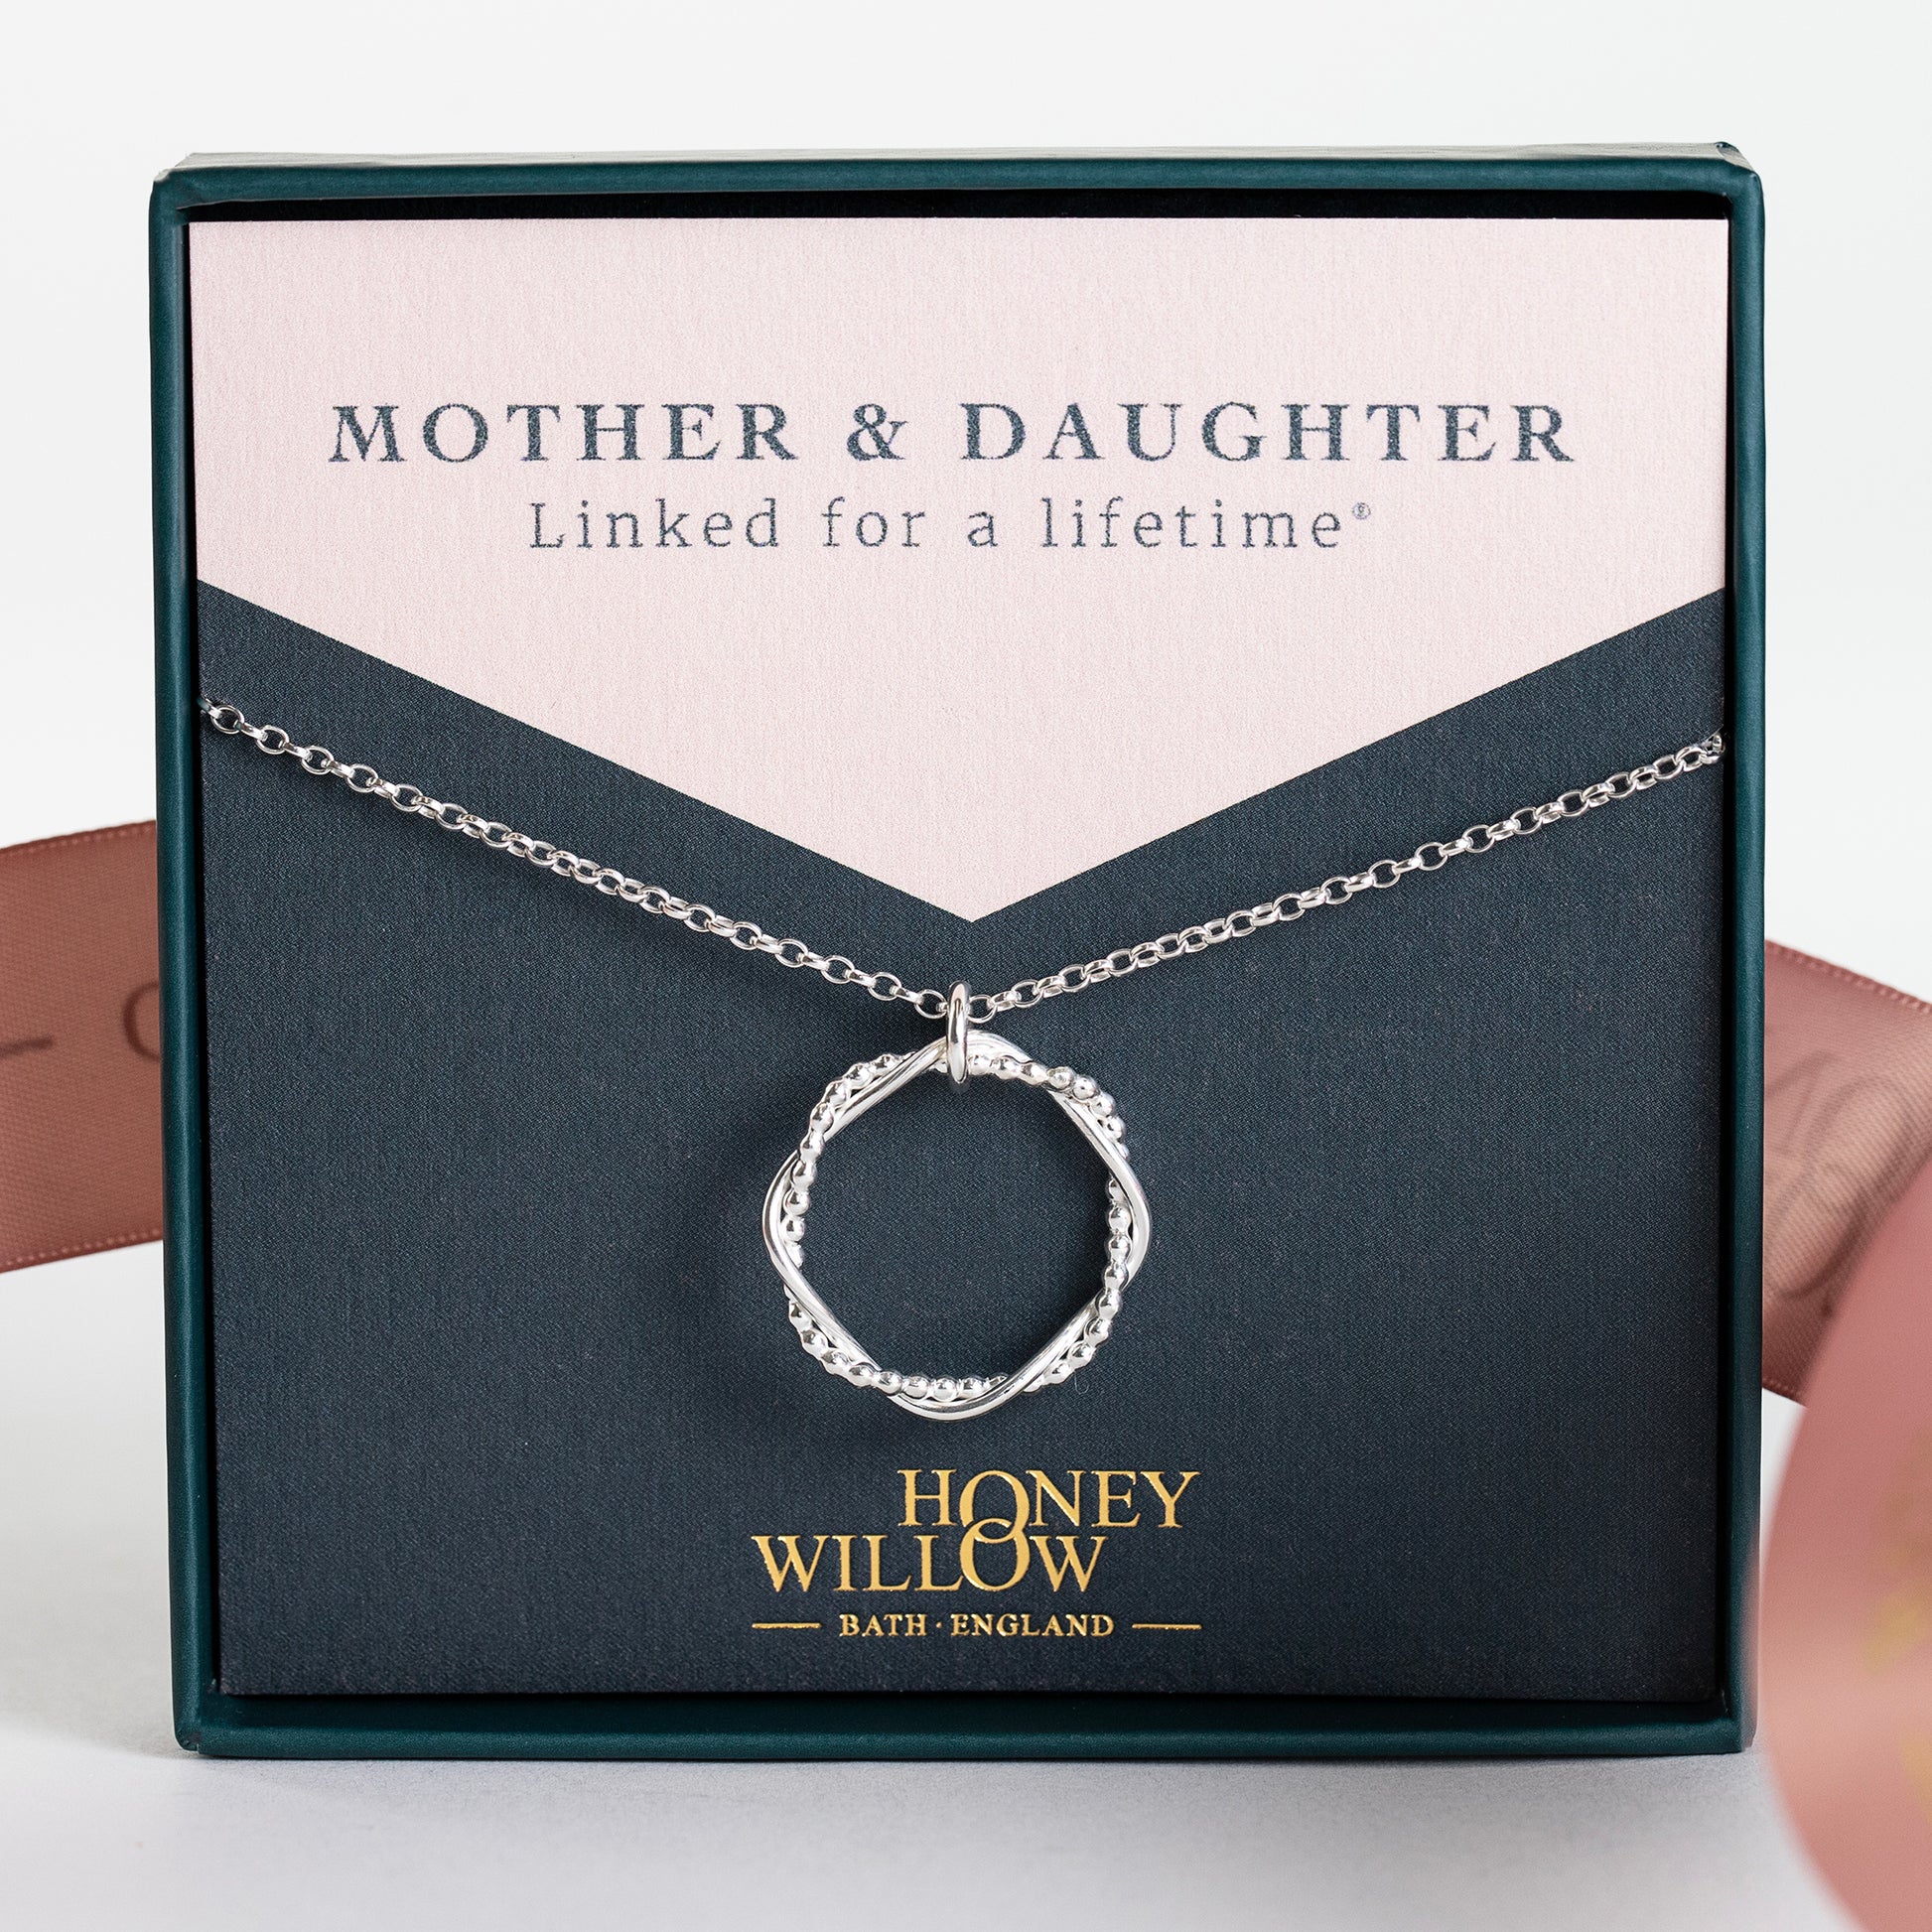 Mother Daughter Necklace - Linked for a Lifetime - Silver Entwined Necklace